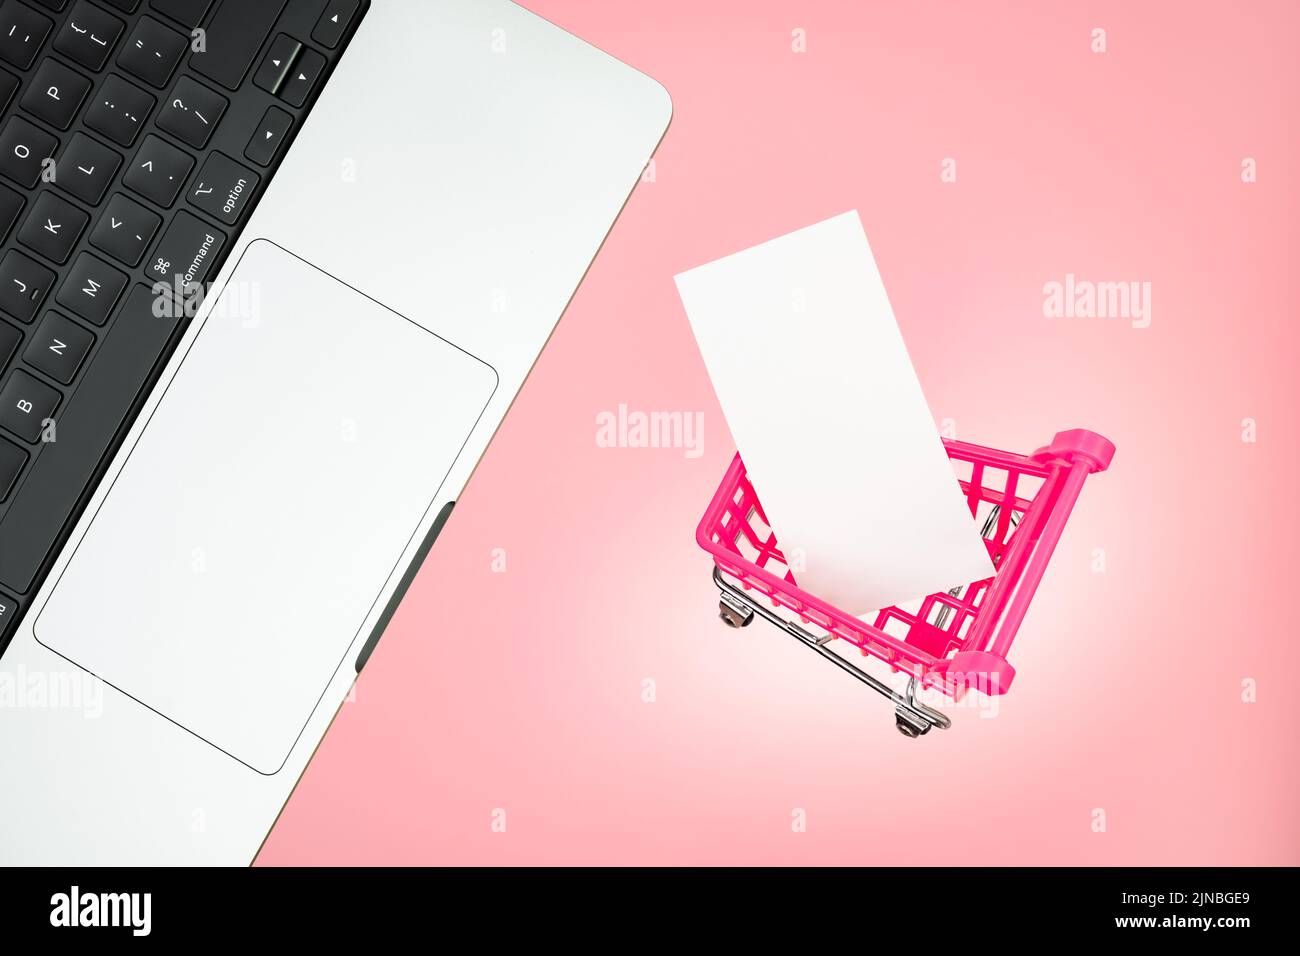 Laptop shopping cart with blank paper tag label white blank paper on pink background. Laptop pink shopping concept. Keyboard laptop cart sale online Stock Photo